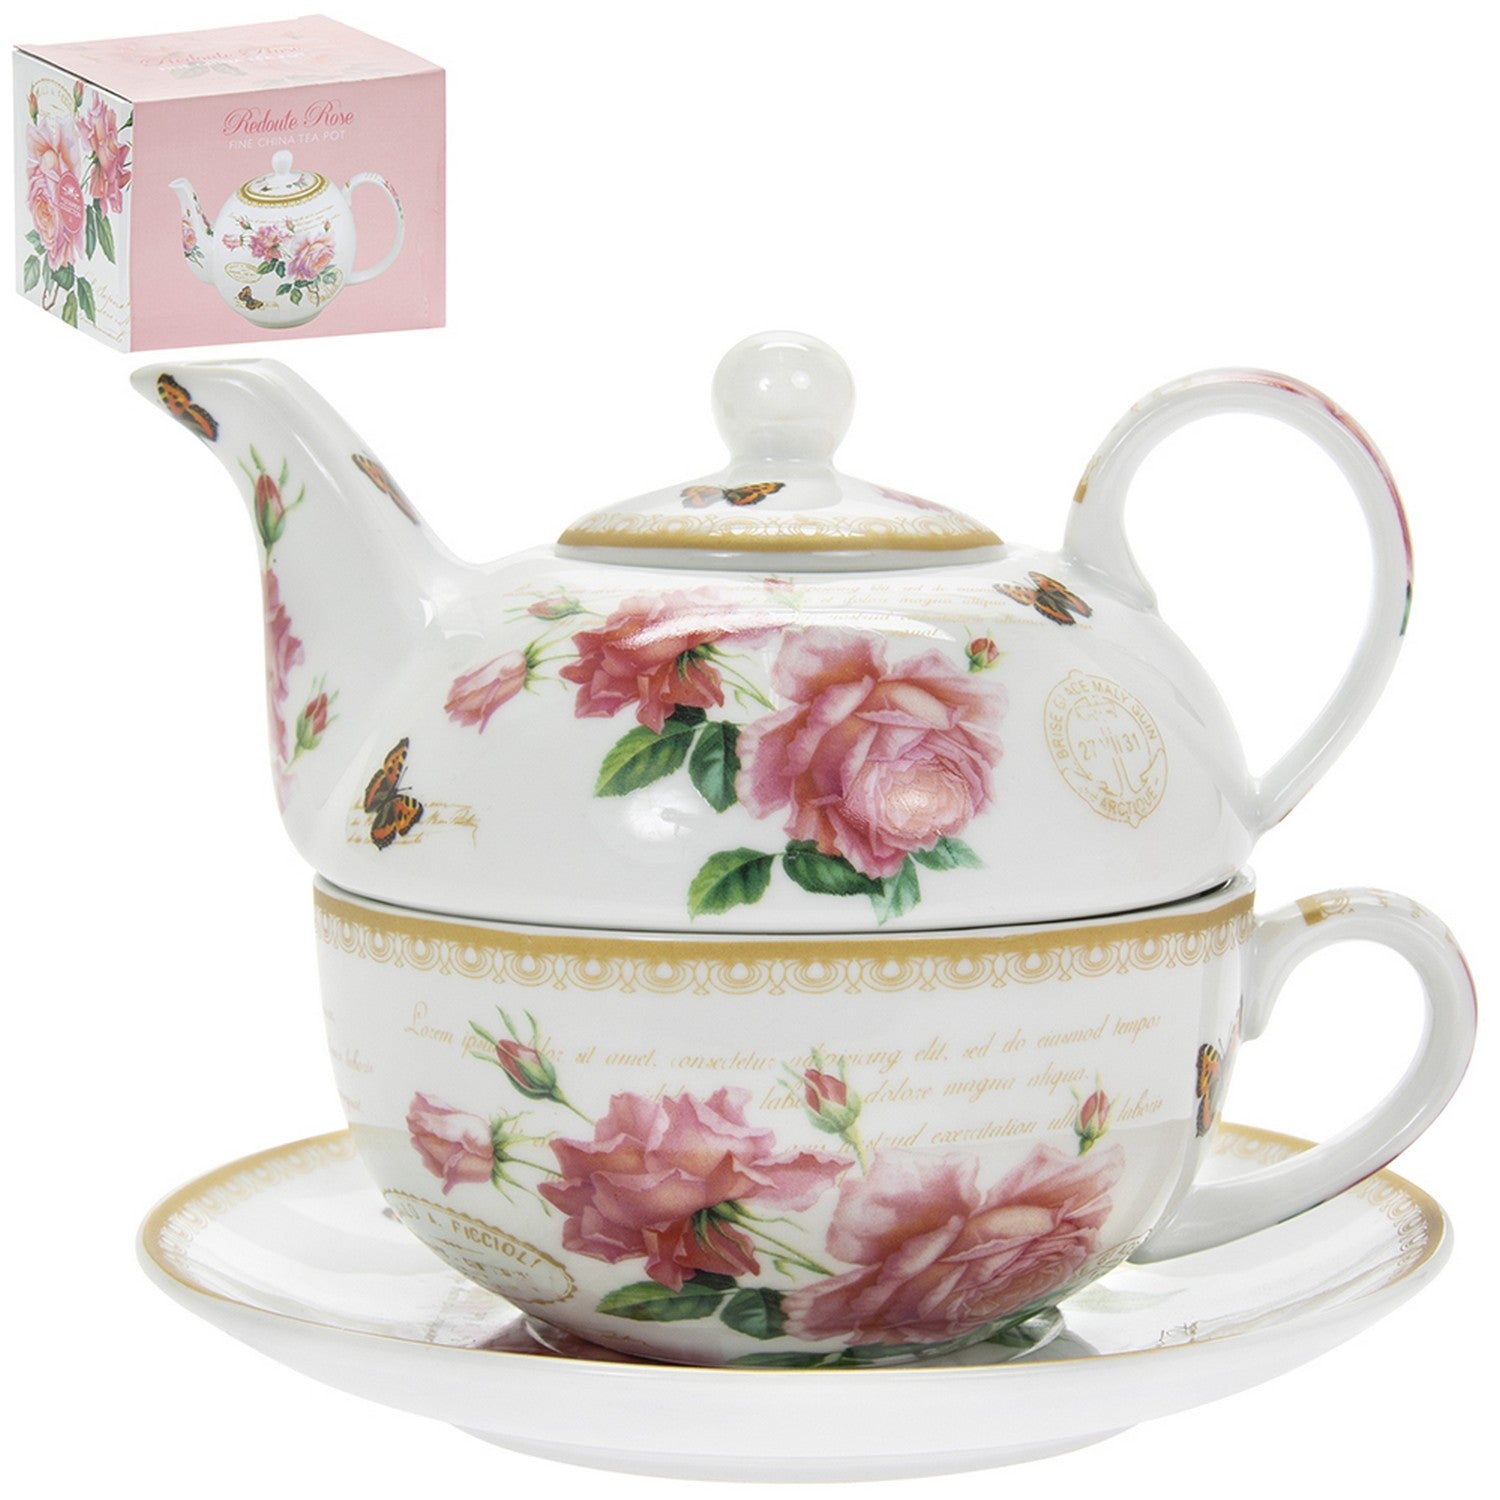 Redoute Rose Tea For One